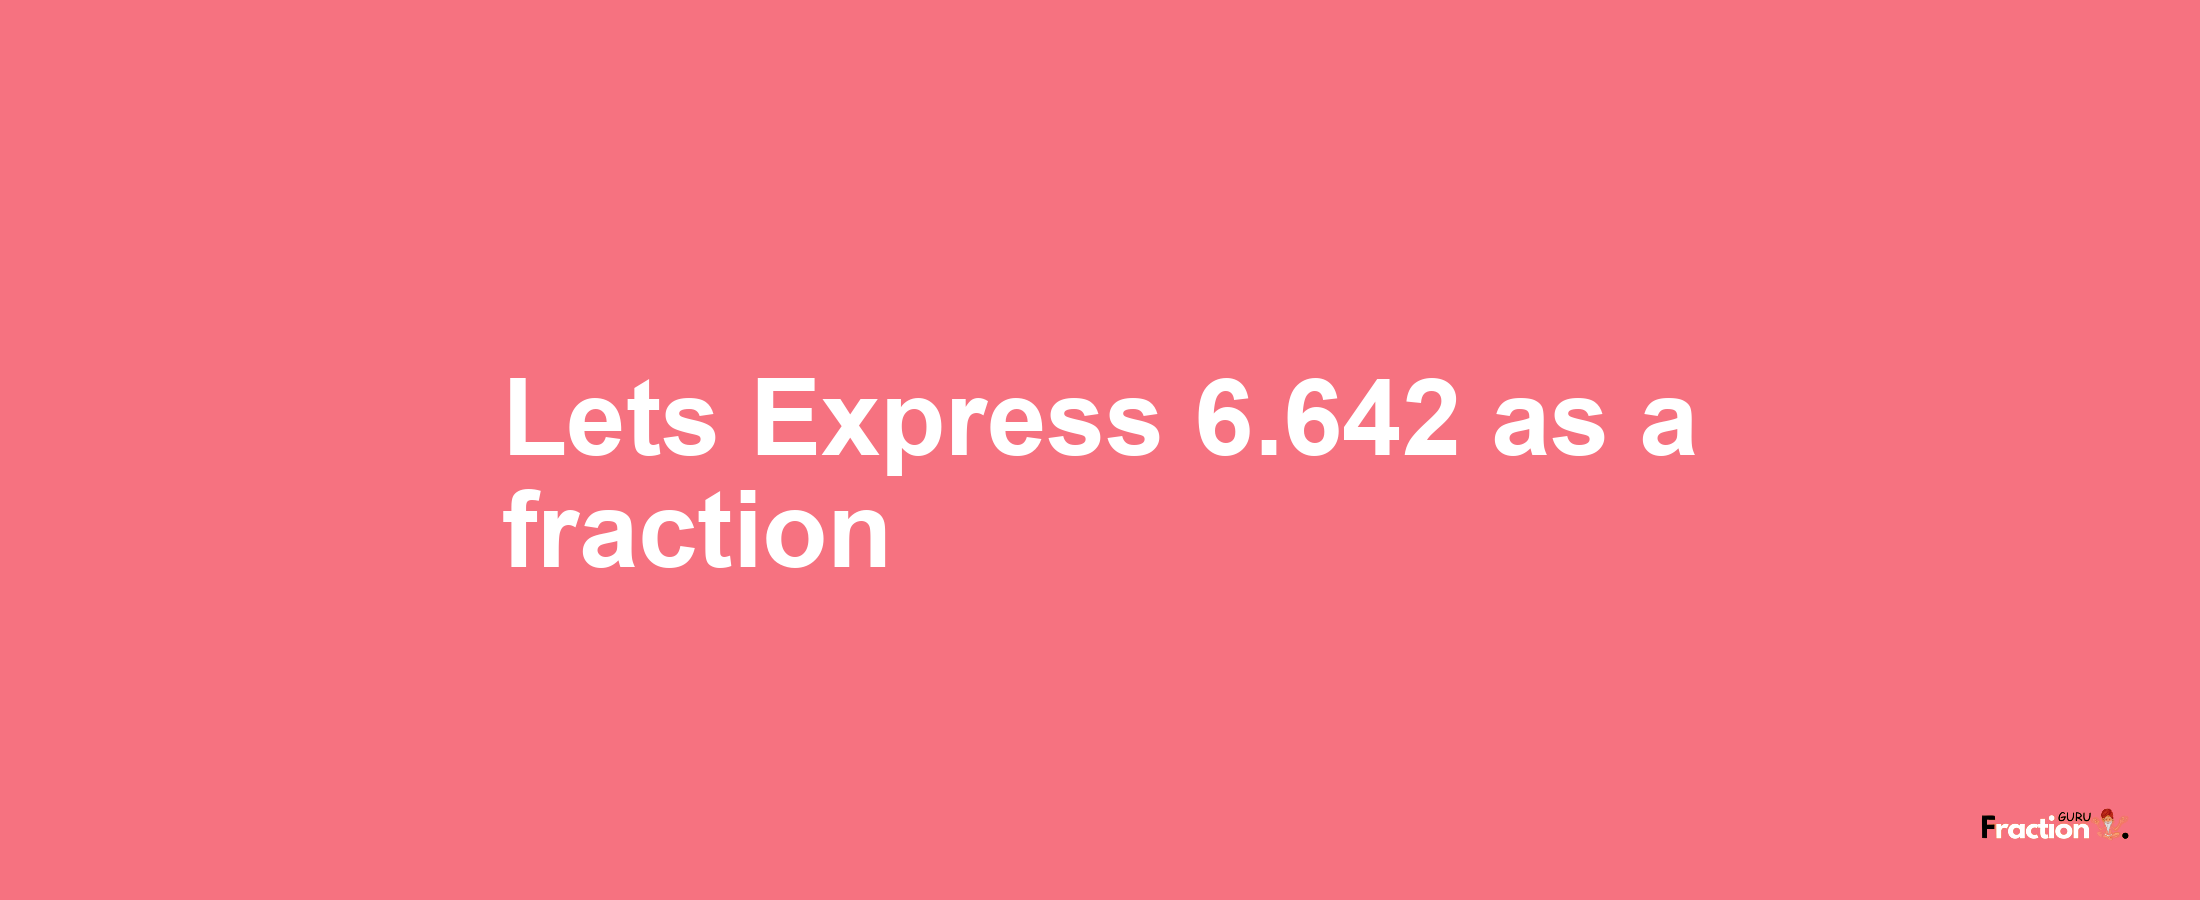 Lets Express 6.642 as afraction